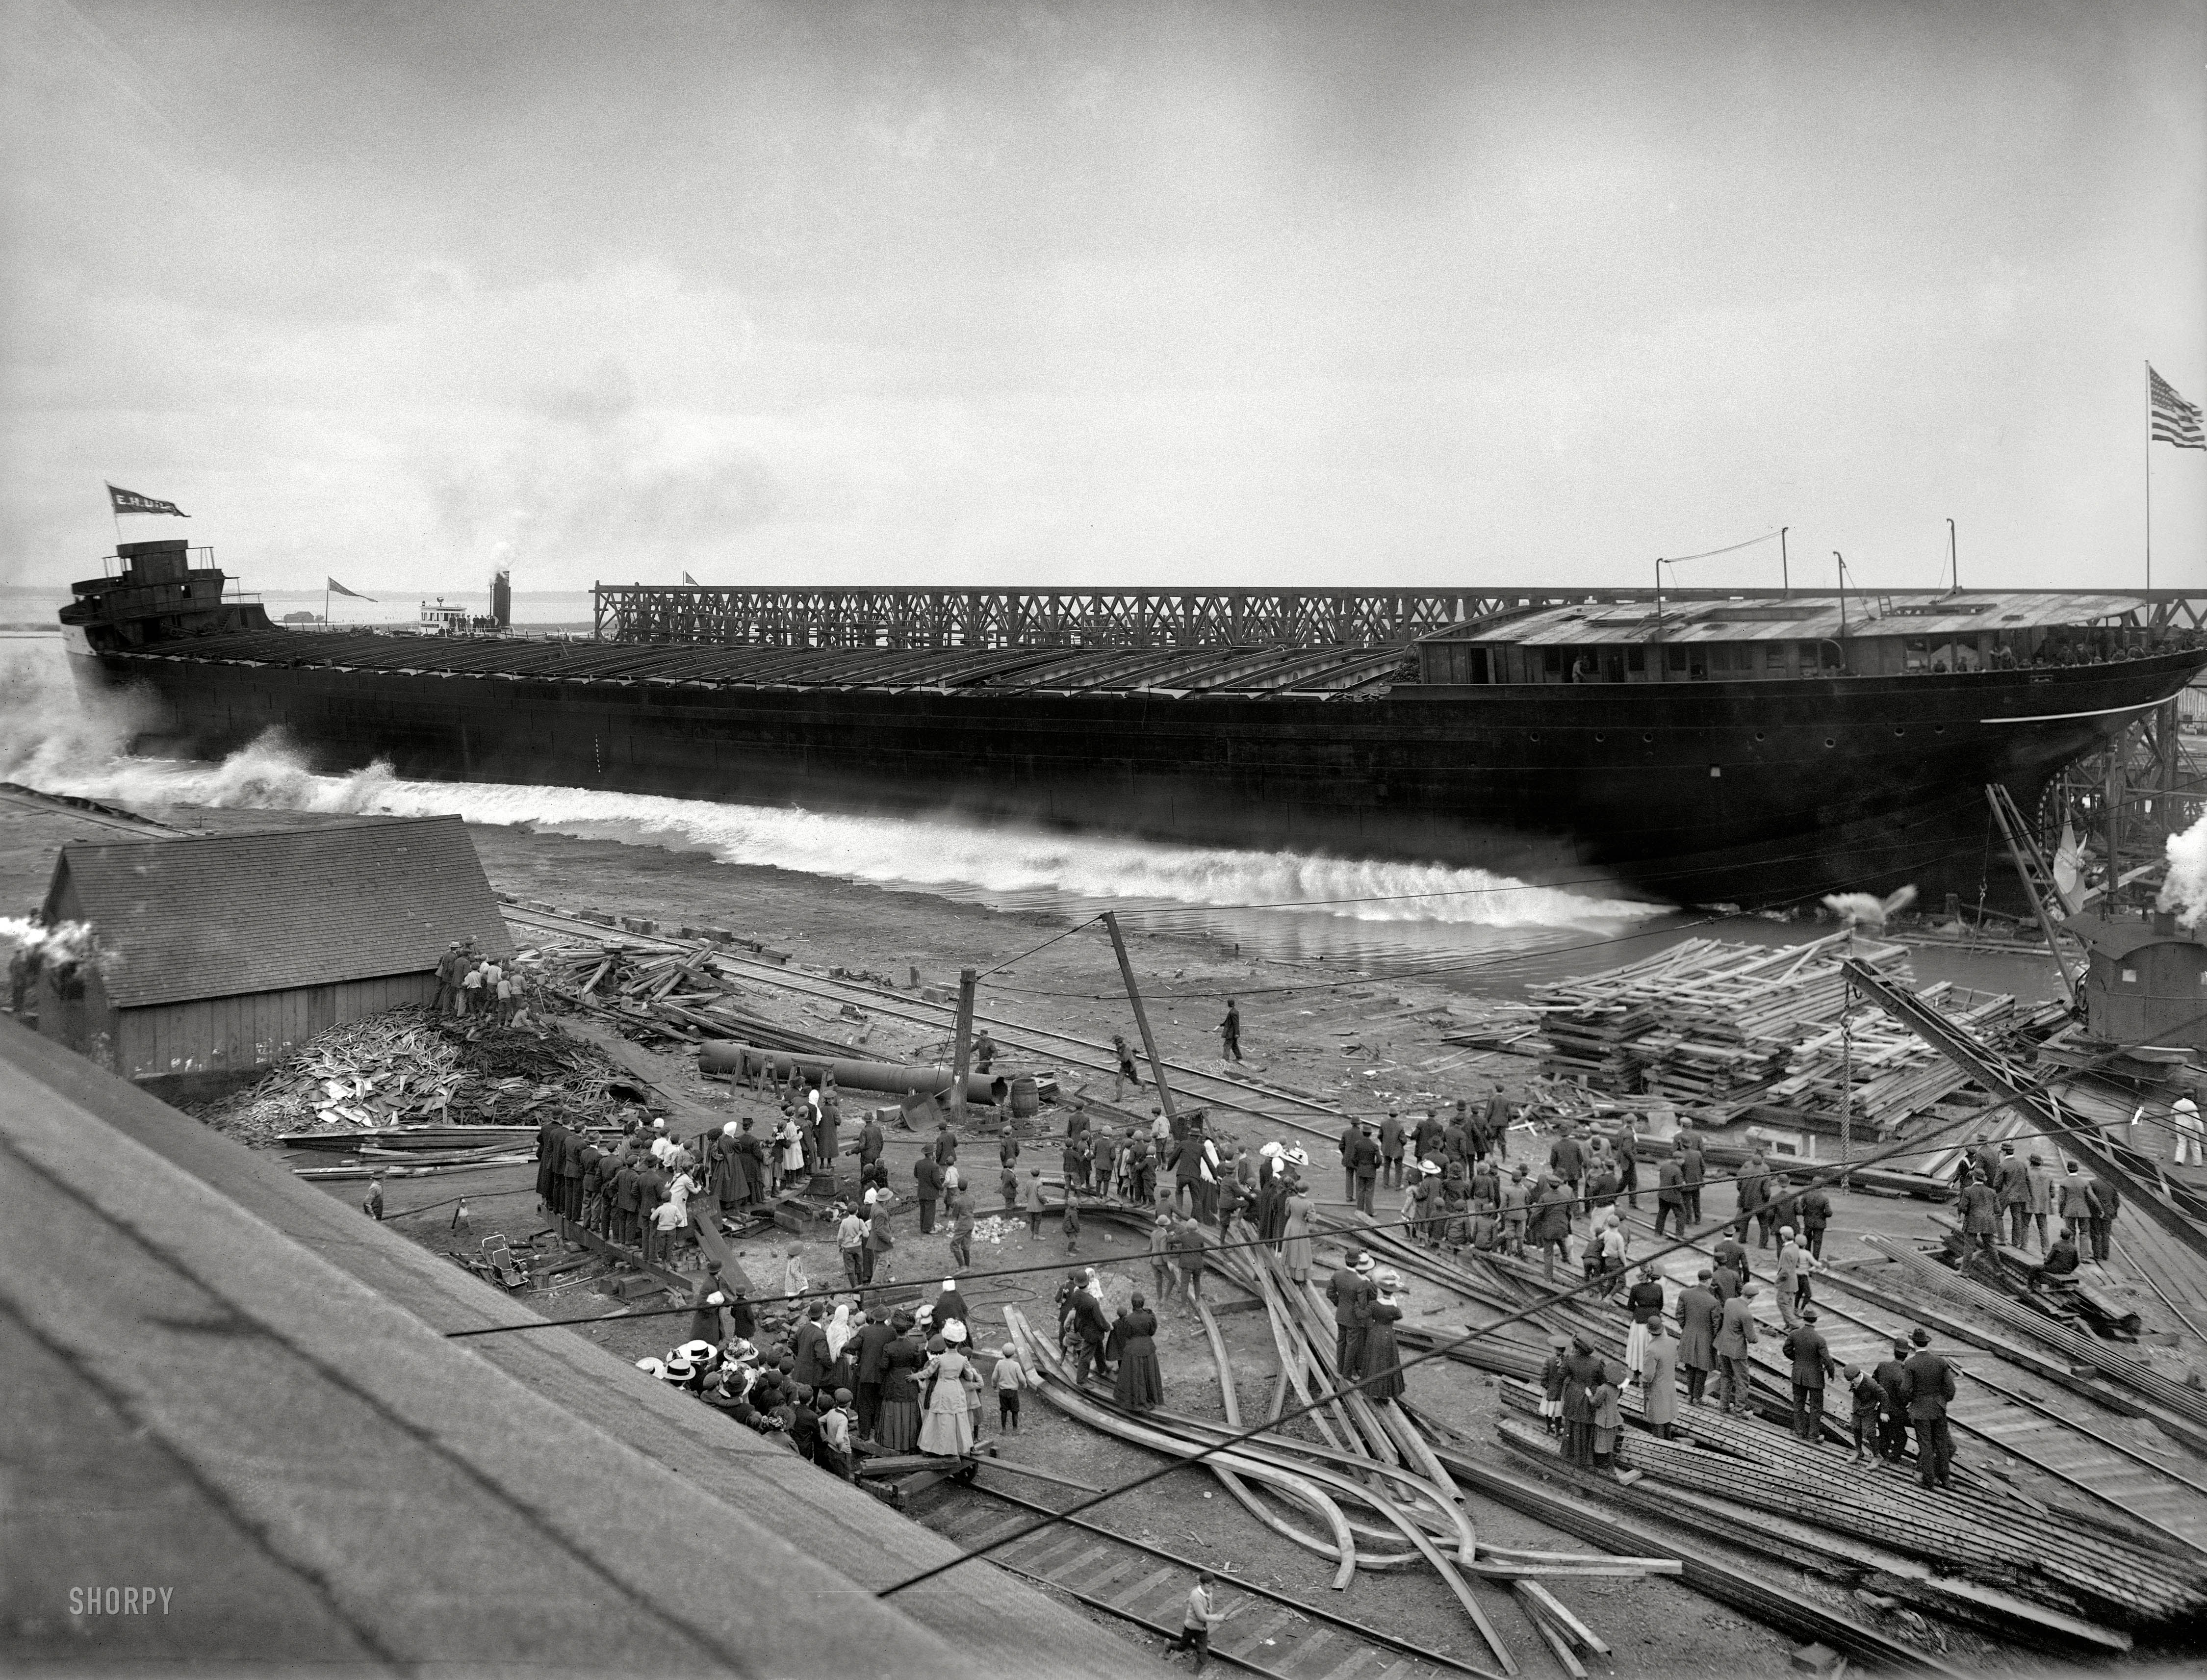 May 14, 1910. "Detroit Shipbuilding Co. yards at Wyandotte, Michigan. Launch of bulk steel carrier E.H. Utley." 8x10 inch glass negative. View full size.